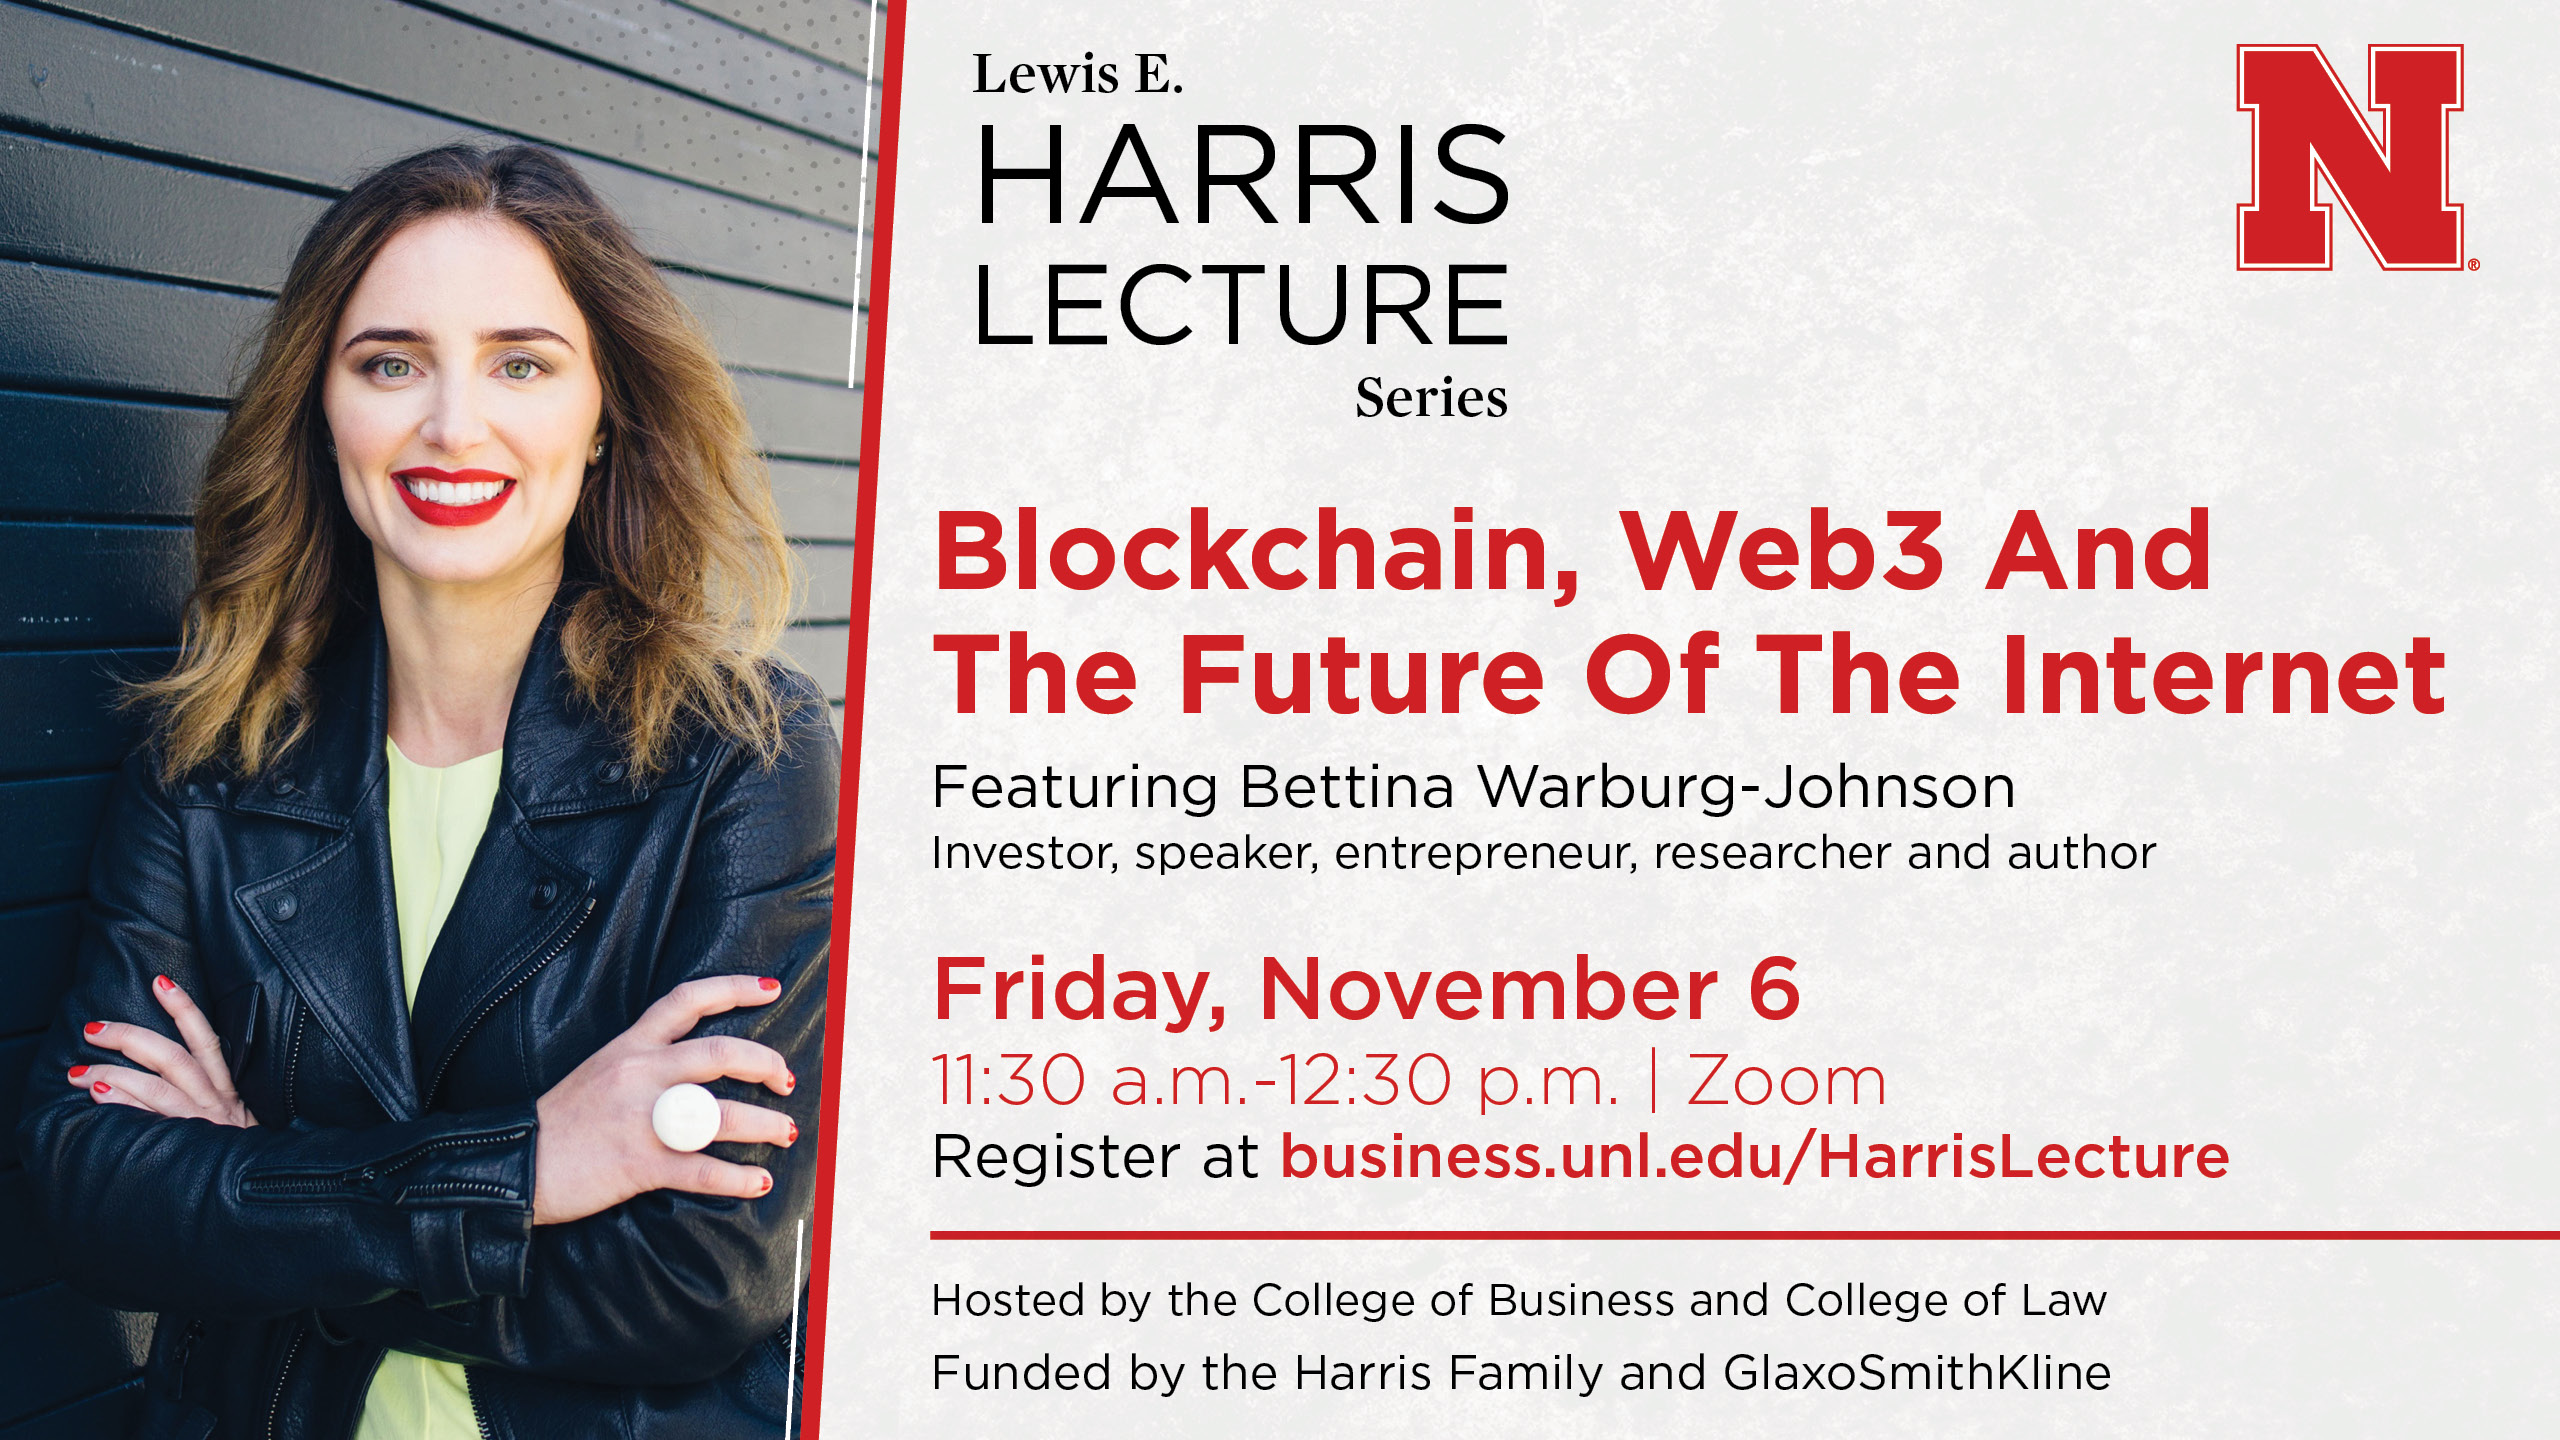 TED Speaker and blockchain expert Bettina Warburg-Johnson will present this year's Lewis E. Harris Lecture on Nov. 6.